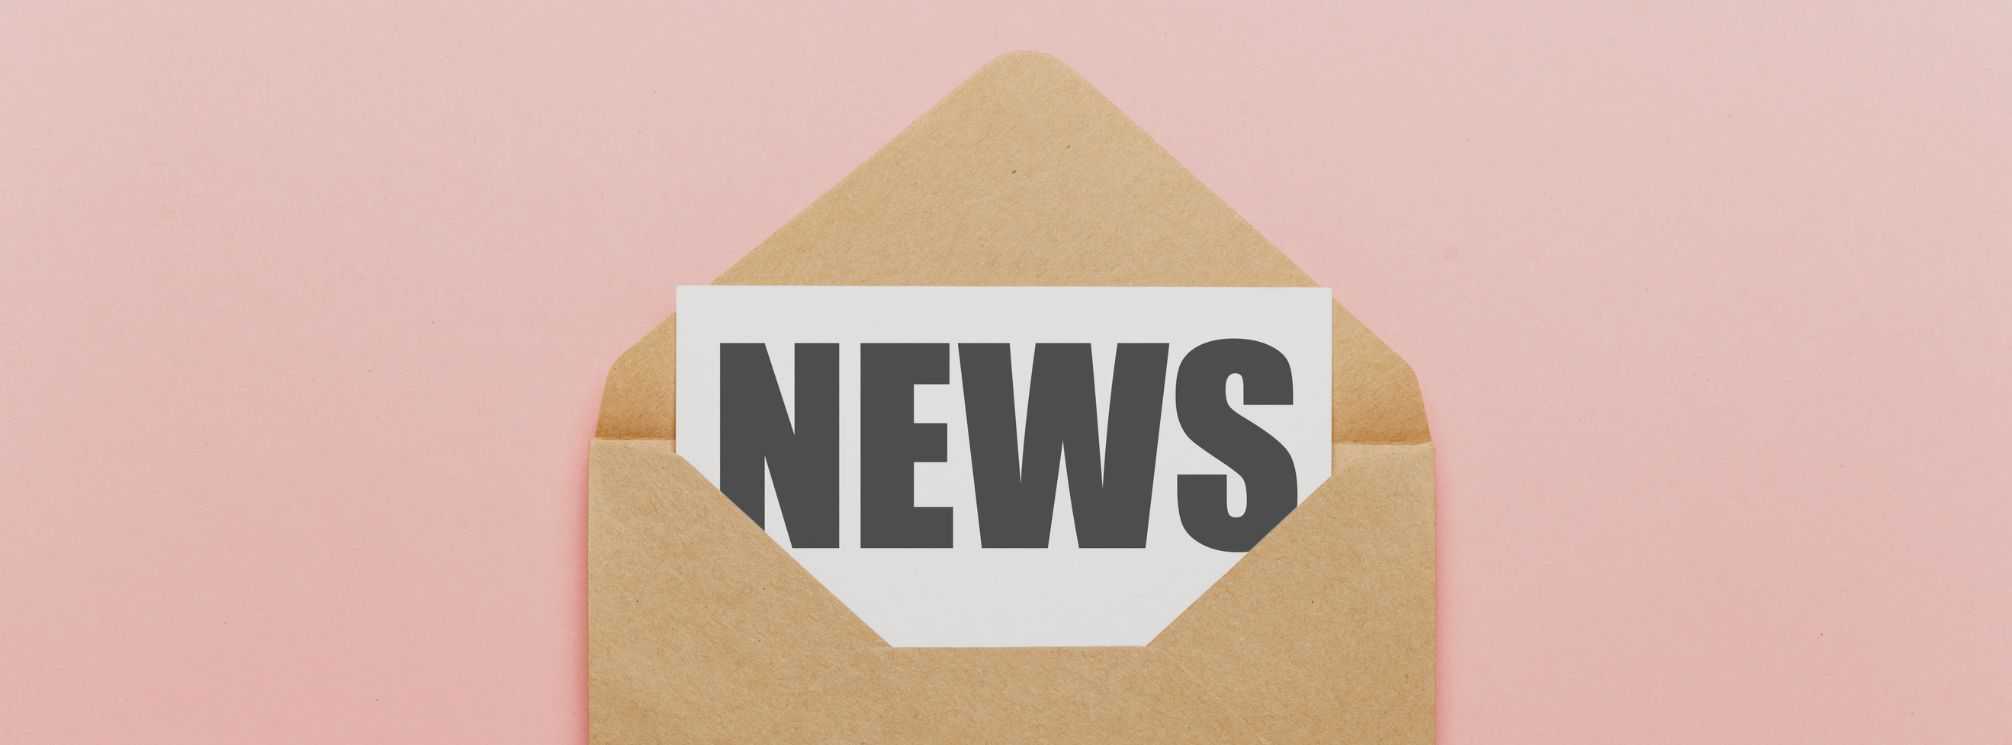 Brown envelope on a pink background. Inside the envelope is a piece of paper that says "news."